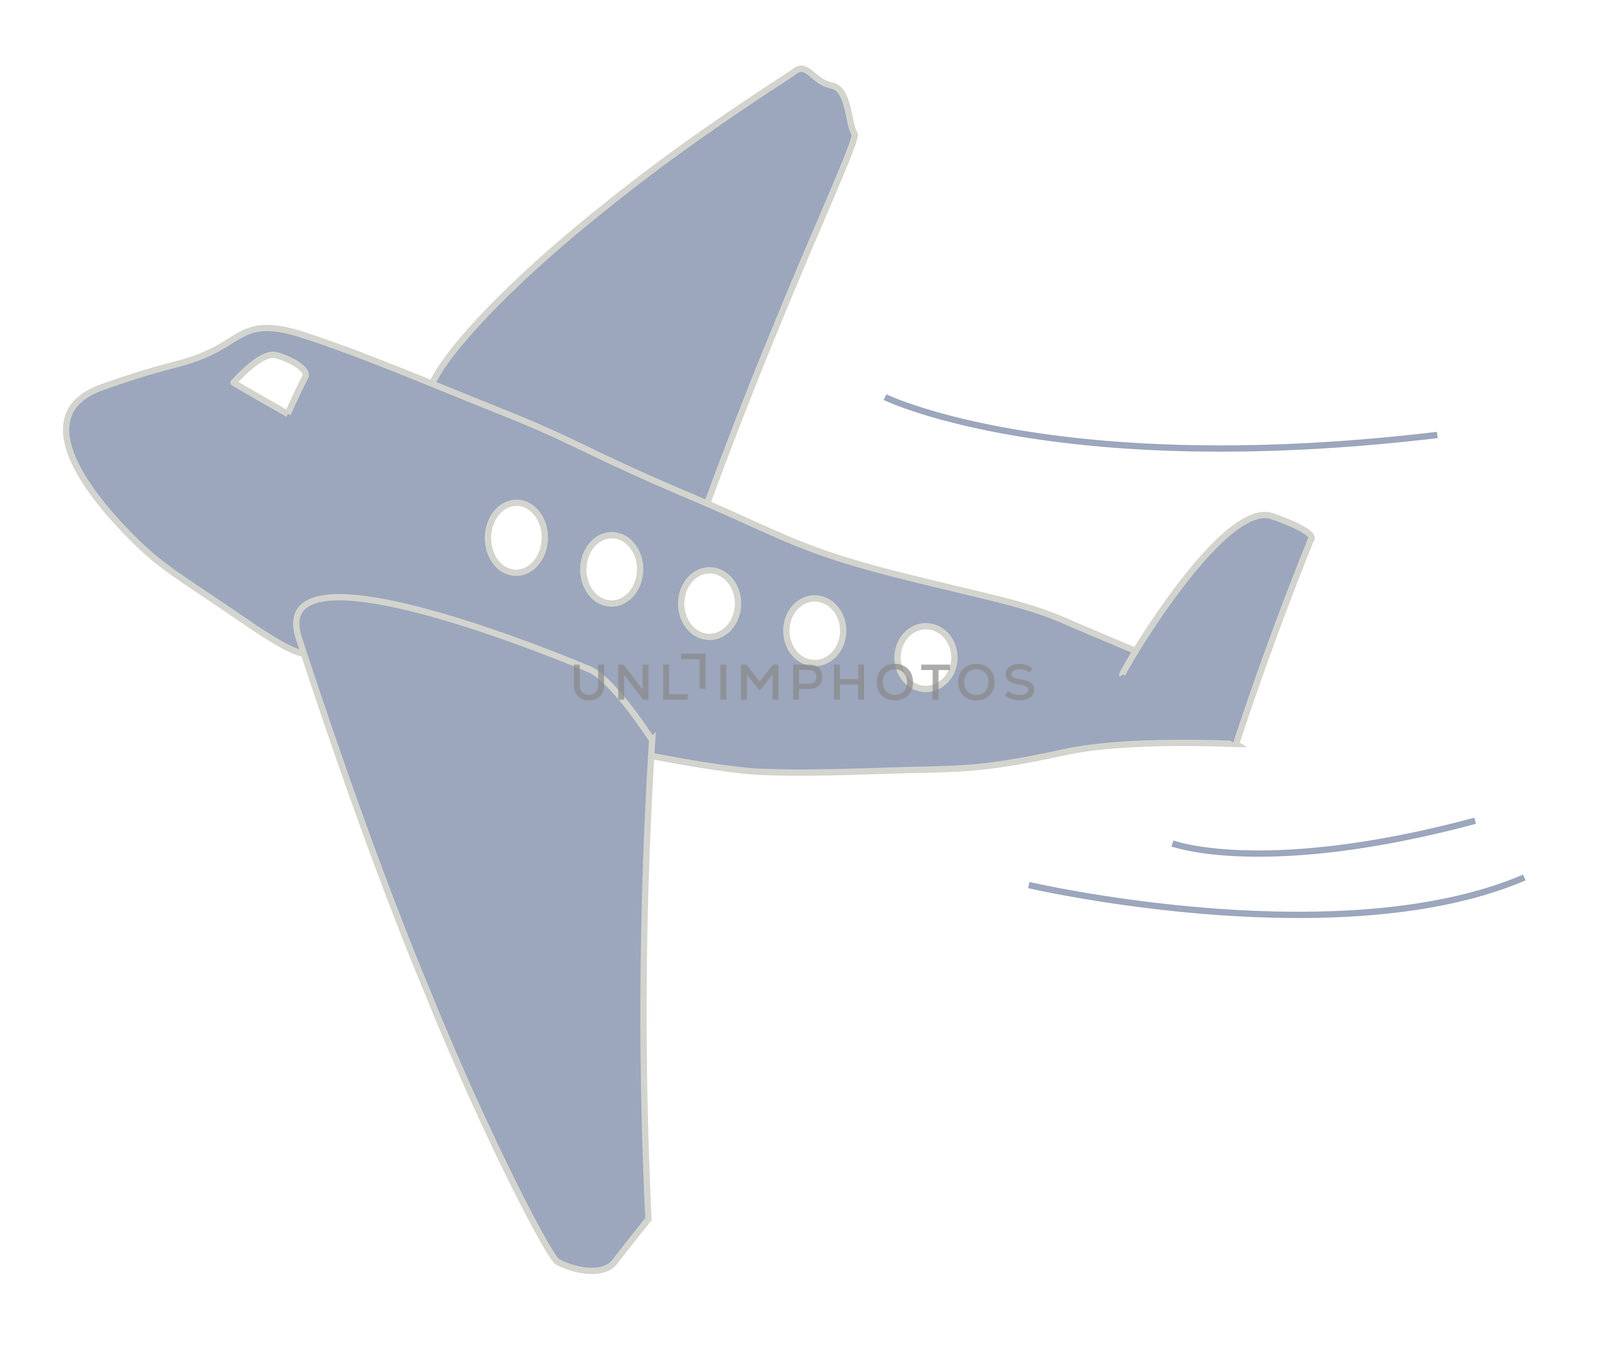 A stylized airplane. All isolated on a white background.